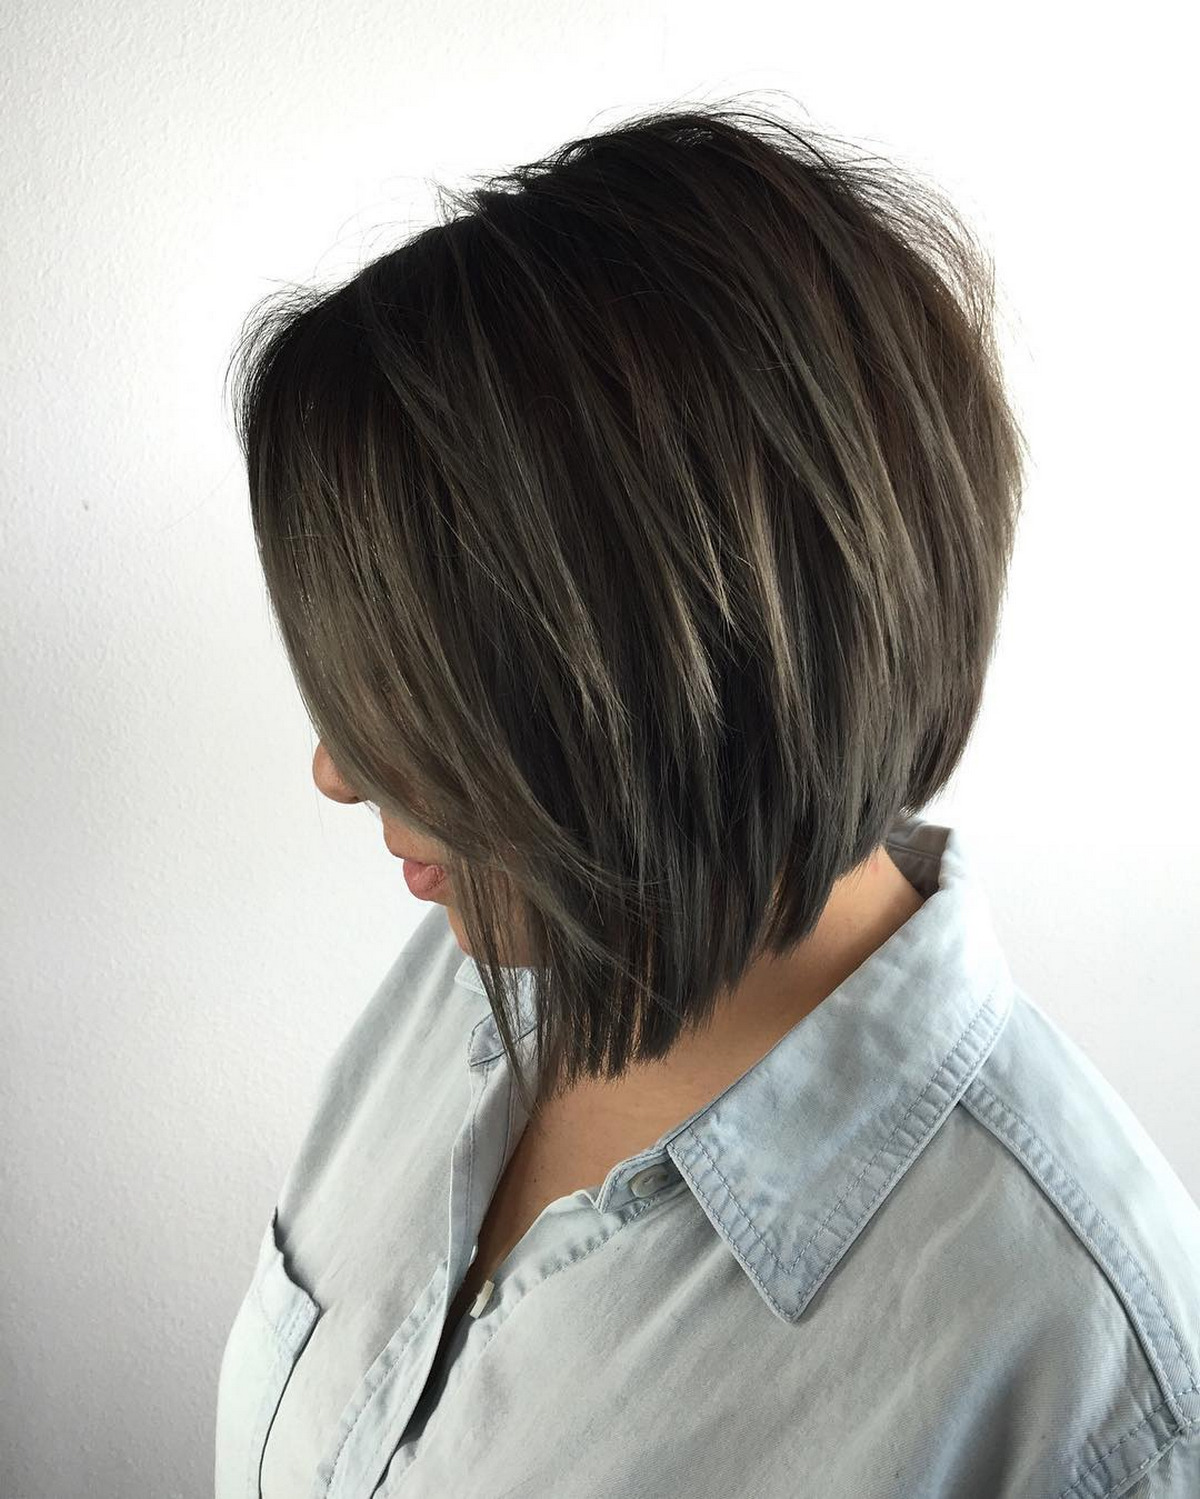 Classy Bob With Angled Midshaft Layers